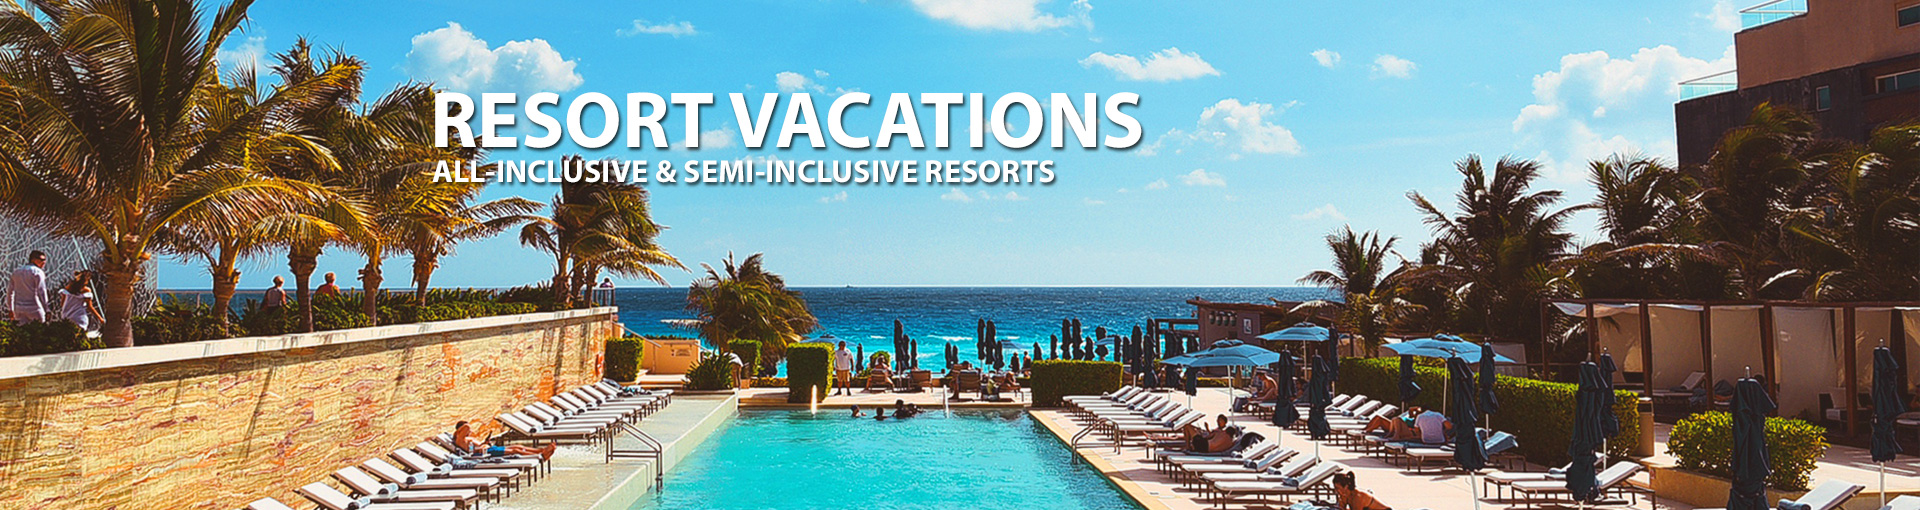 All Inclusive Resort and Semiinclusive Resort Vacations, 2024, 2025